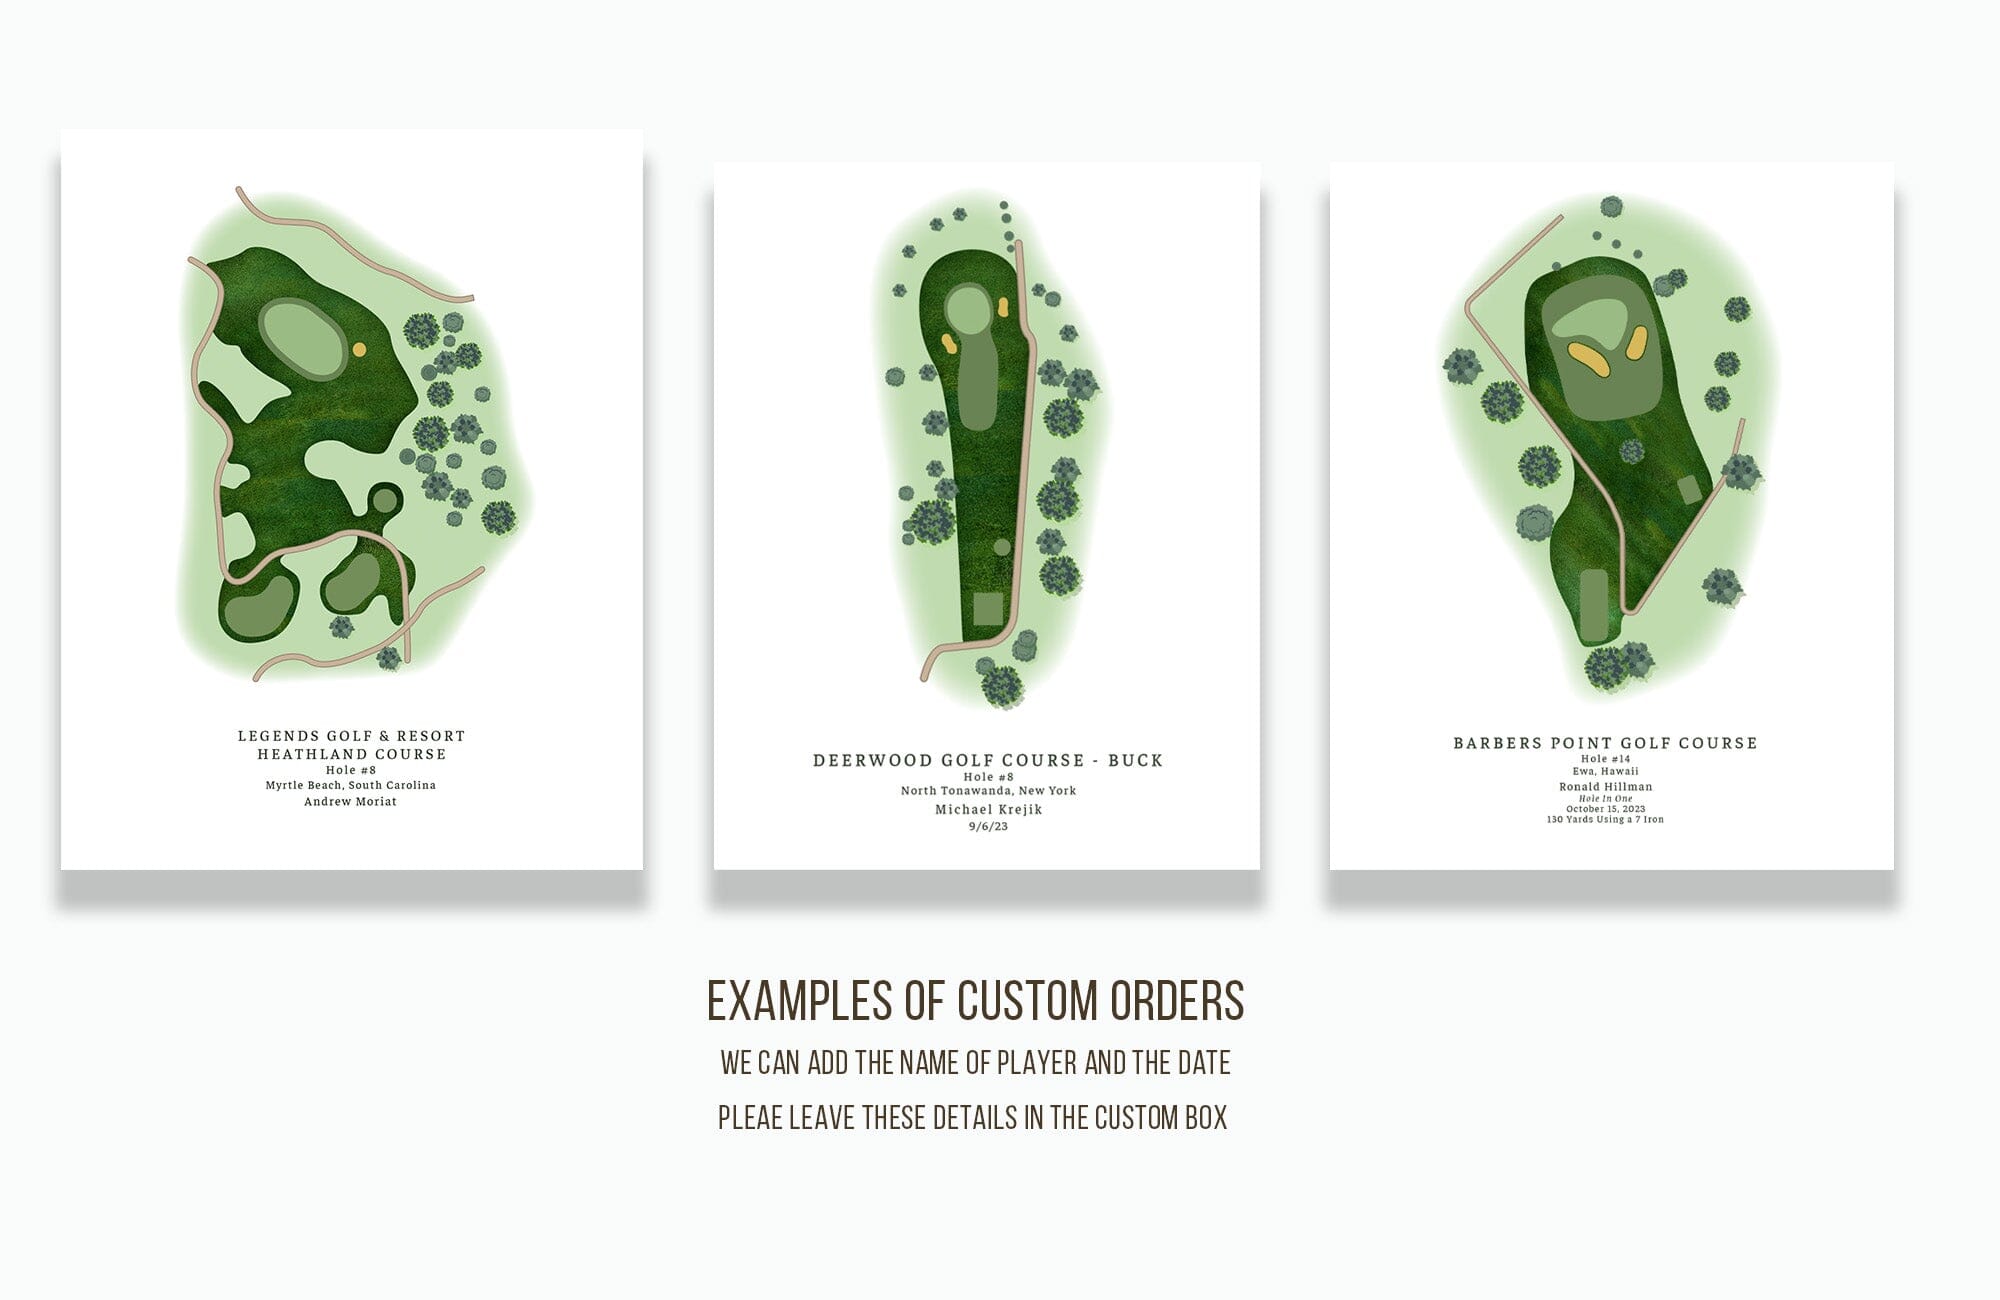 Hole In One, CUSTOM Golf Course, Golf Decor, Golf Gifts Map World Vibe Studio 